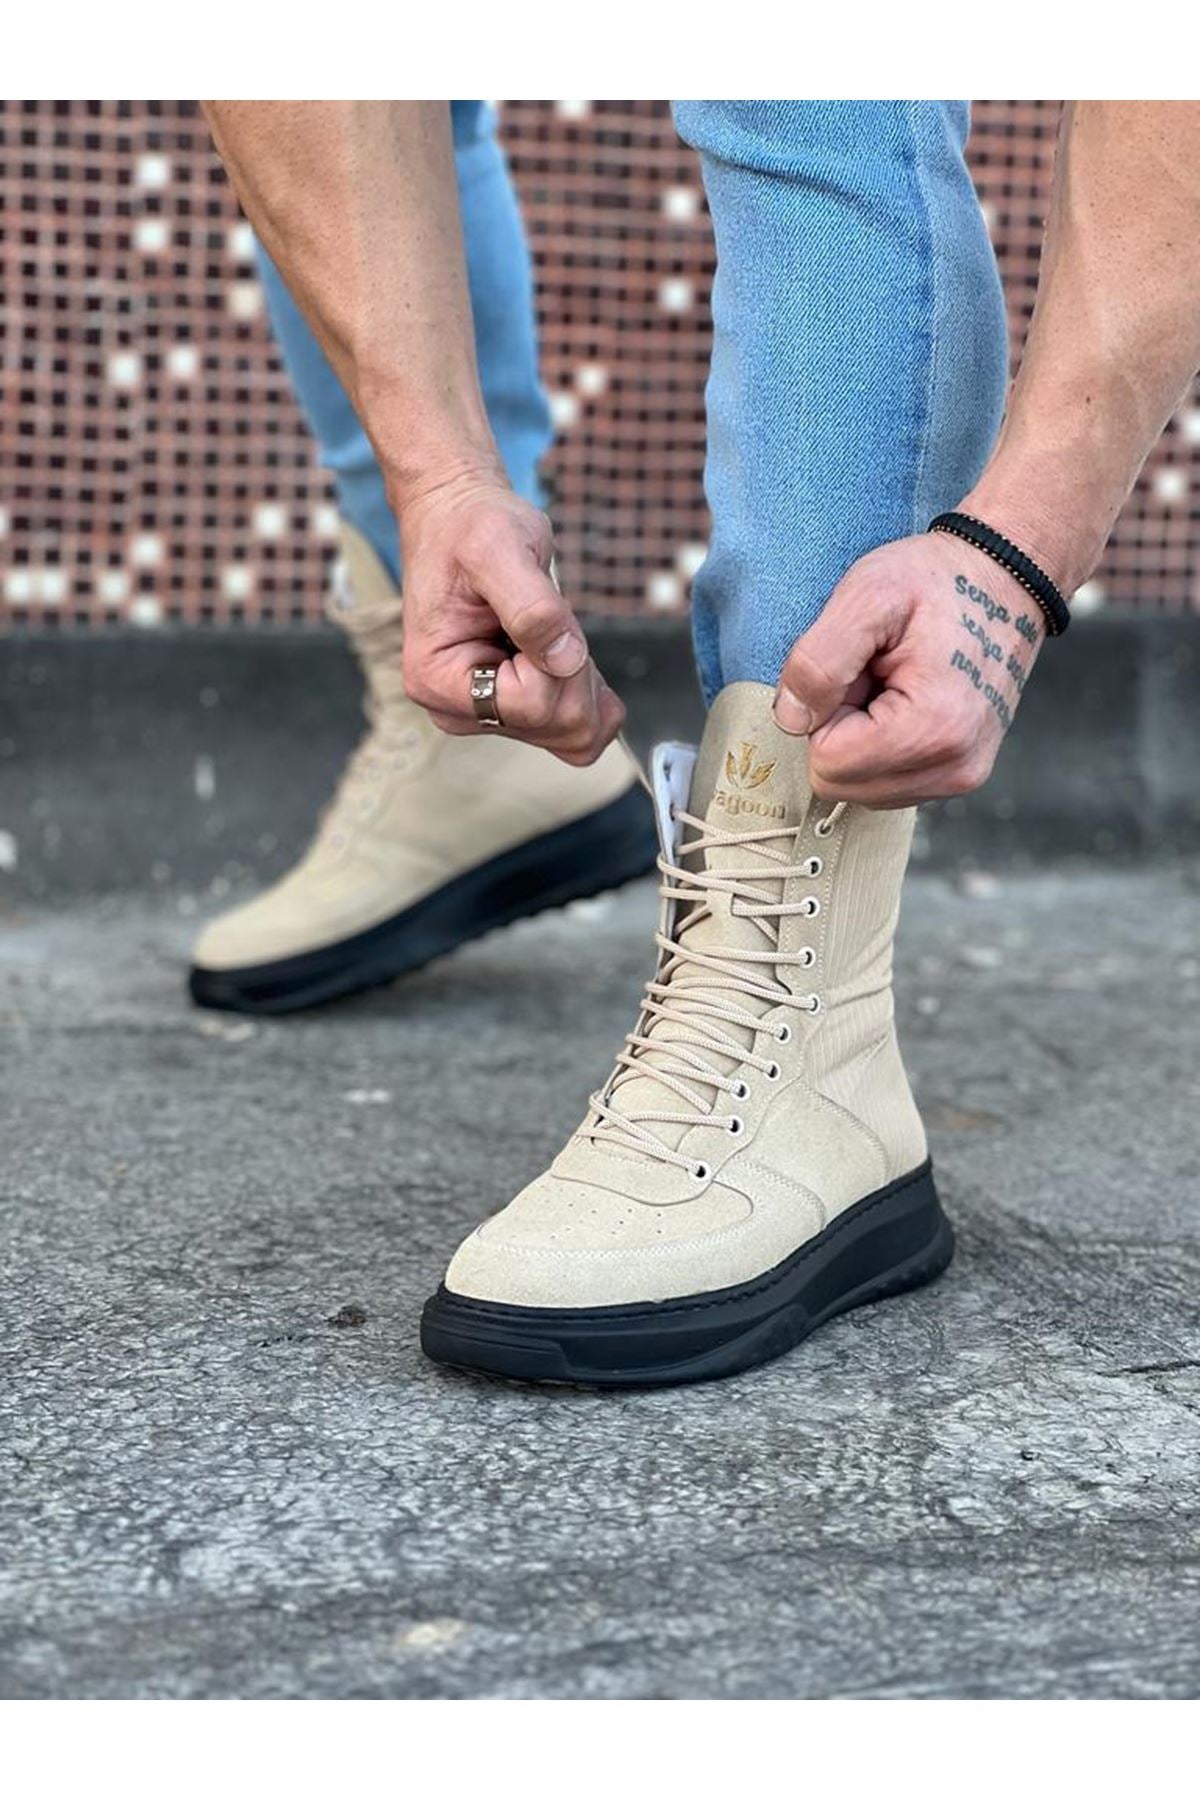 WG012 Men's Beige Charcoal Suede Leather Long Lace-Up Boots - STREETMODE™